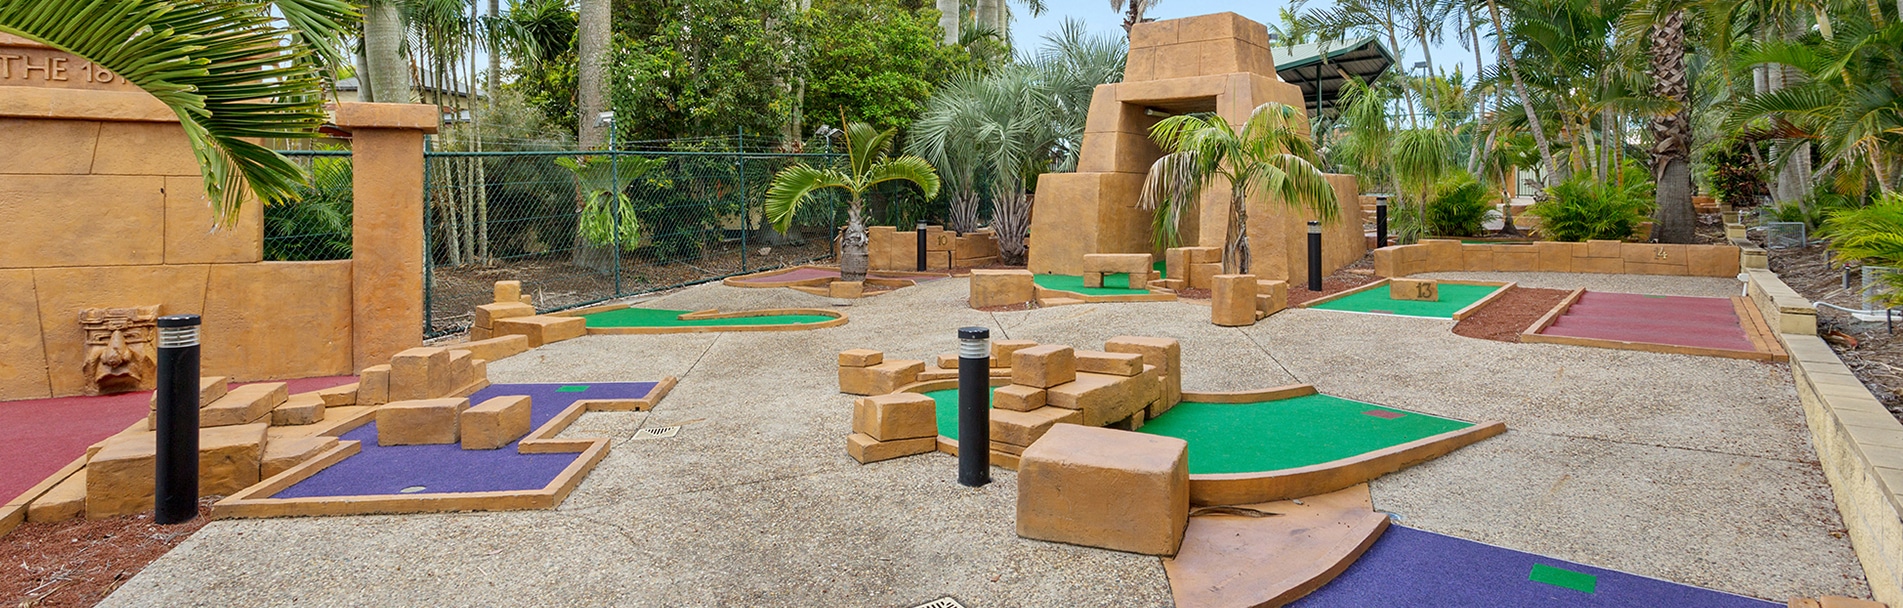 Wide angle view of 18 hole mini golf course at Brisbane Holiday Village